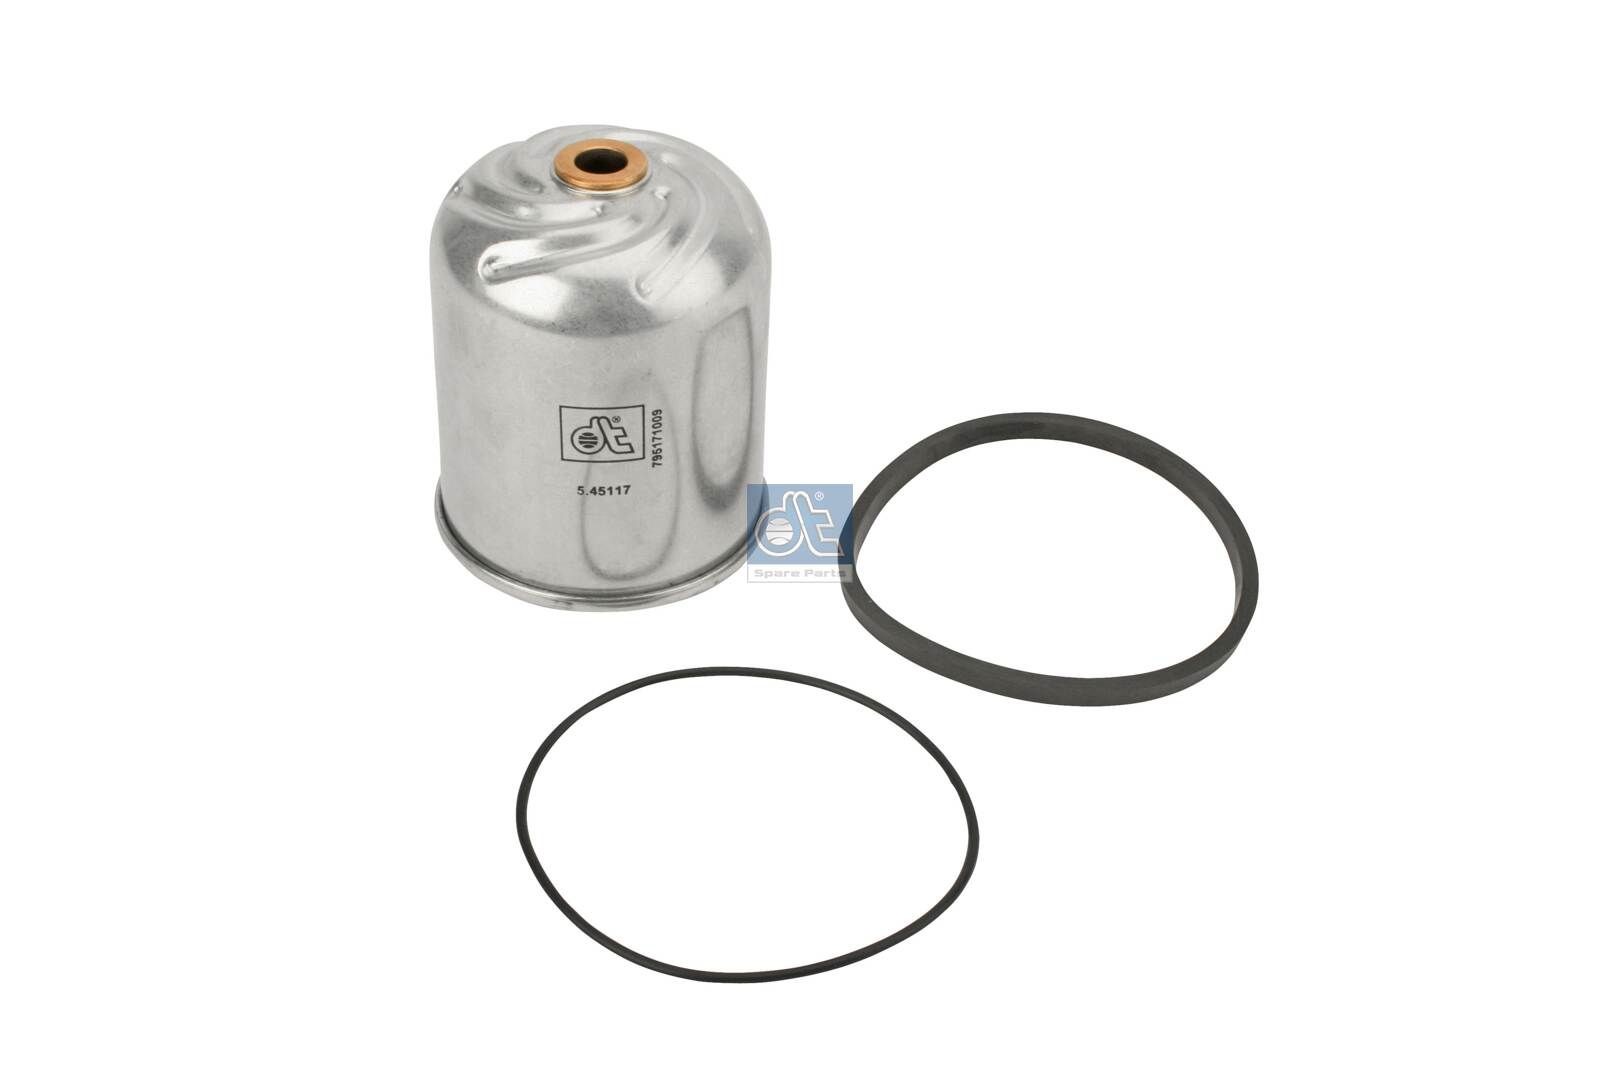 ZR 903 x DT Spare Parts with gaskets/seals, Spin-on Filter Inner Diameter 2: 14mm, Ø: 92mm, Height: 122mm Oil filters 5.45117 buy